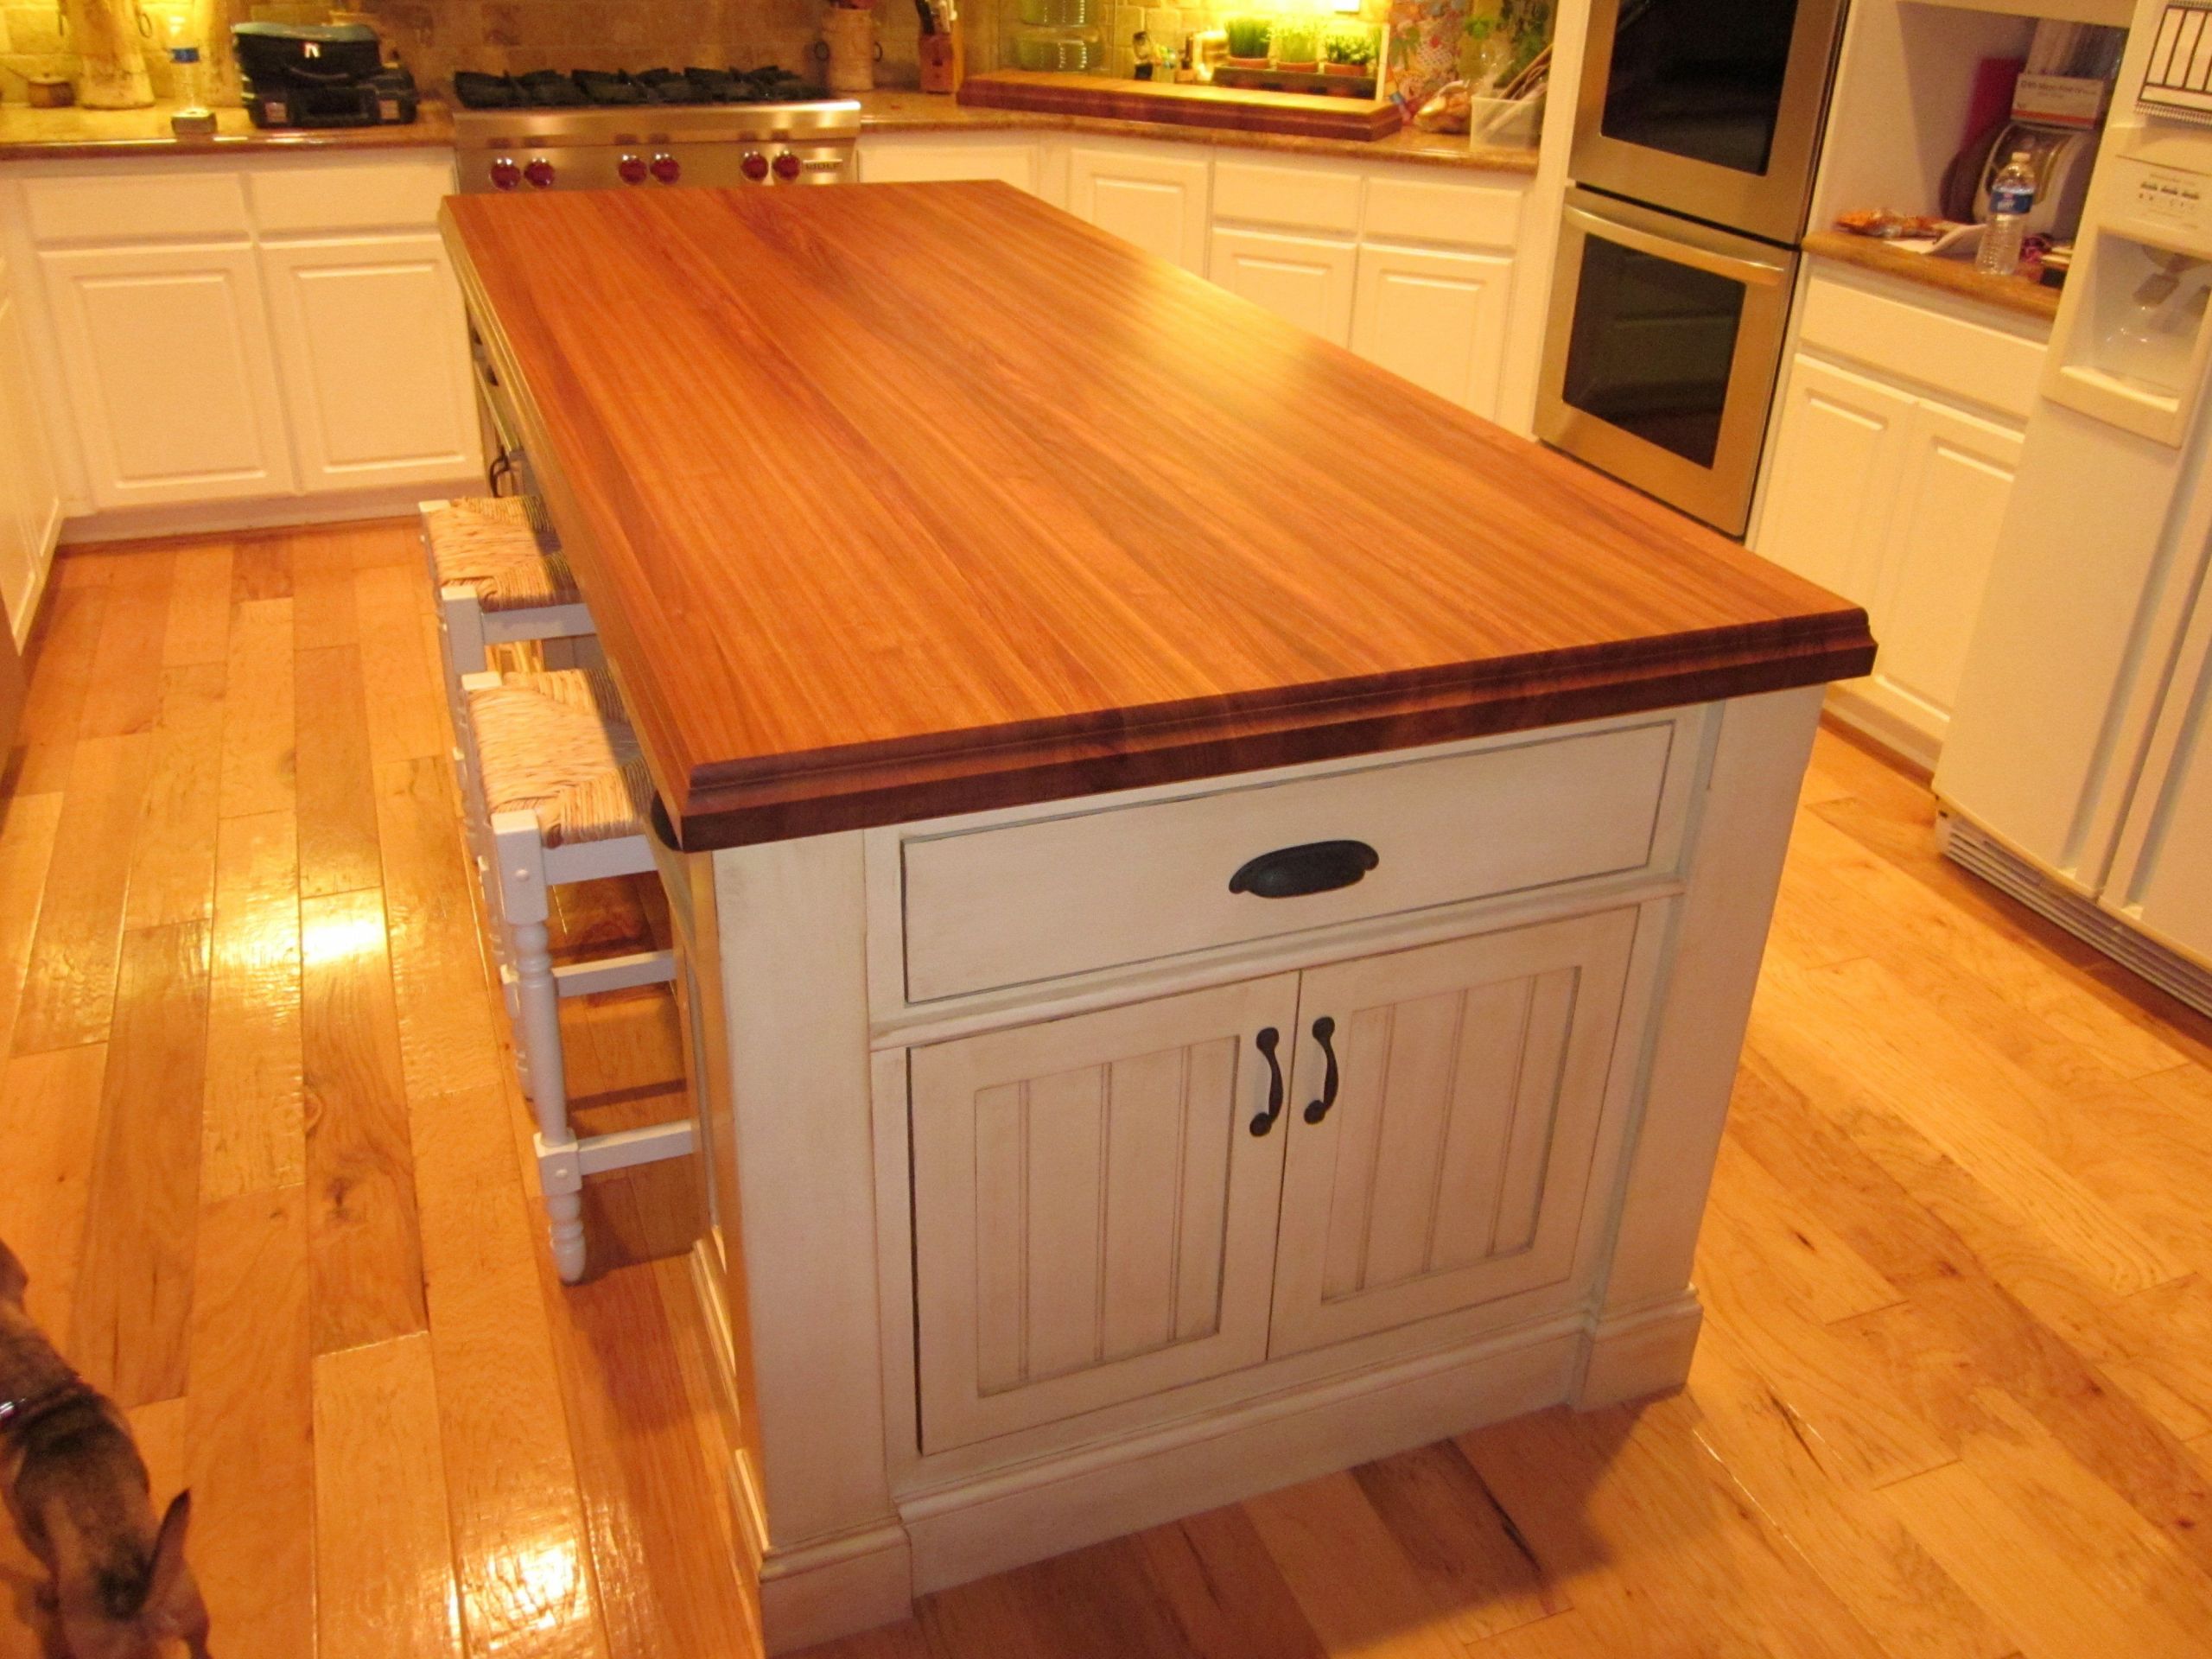 Kitchen Counter Bench
 All About Wood Kitchen Countertops You Have to Know